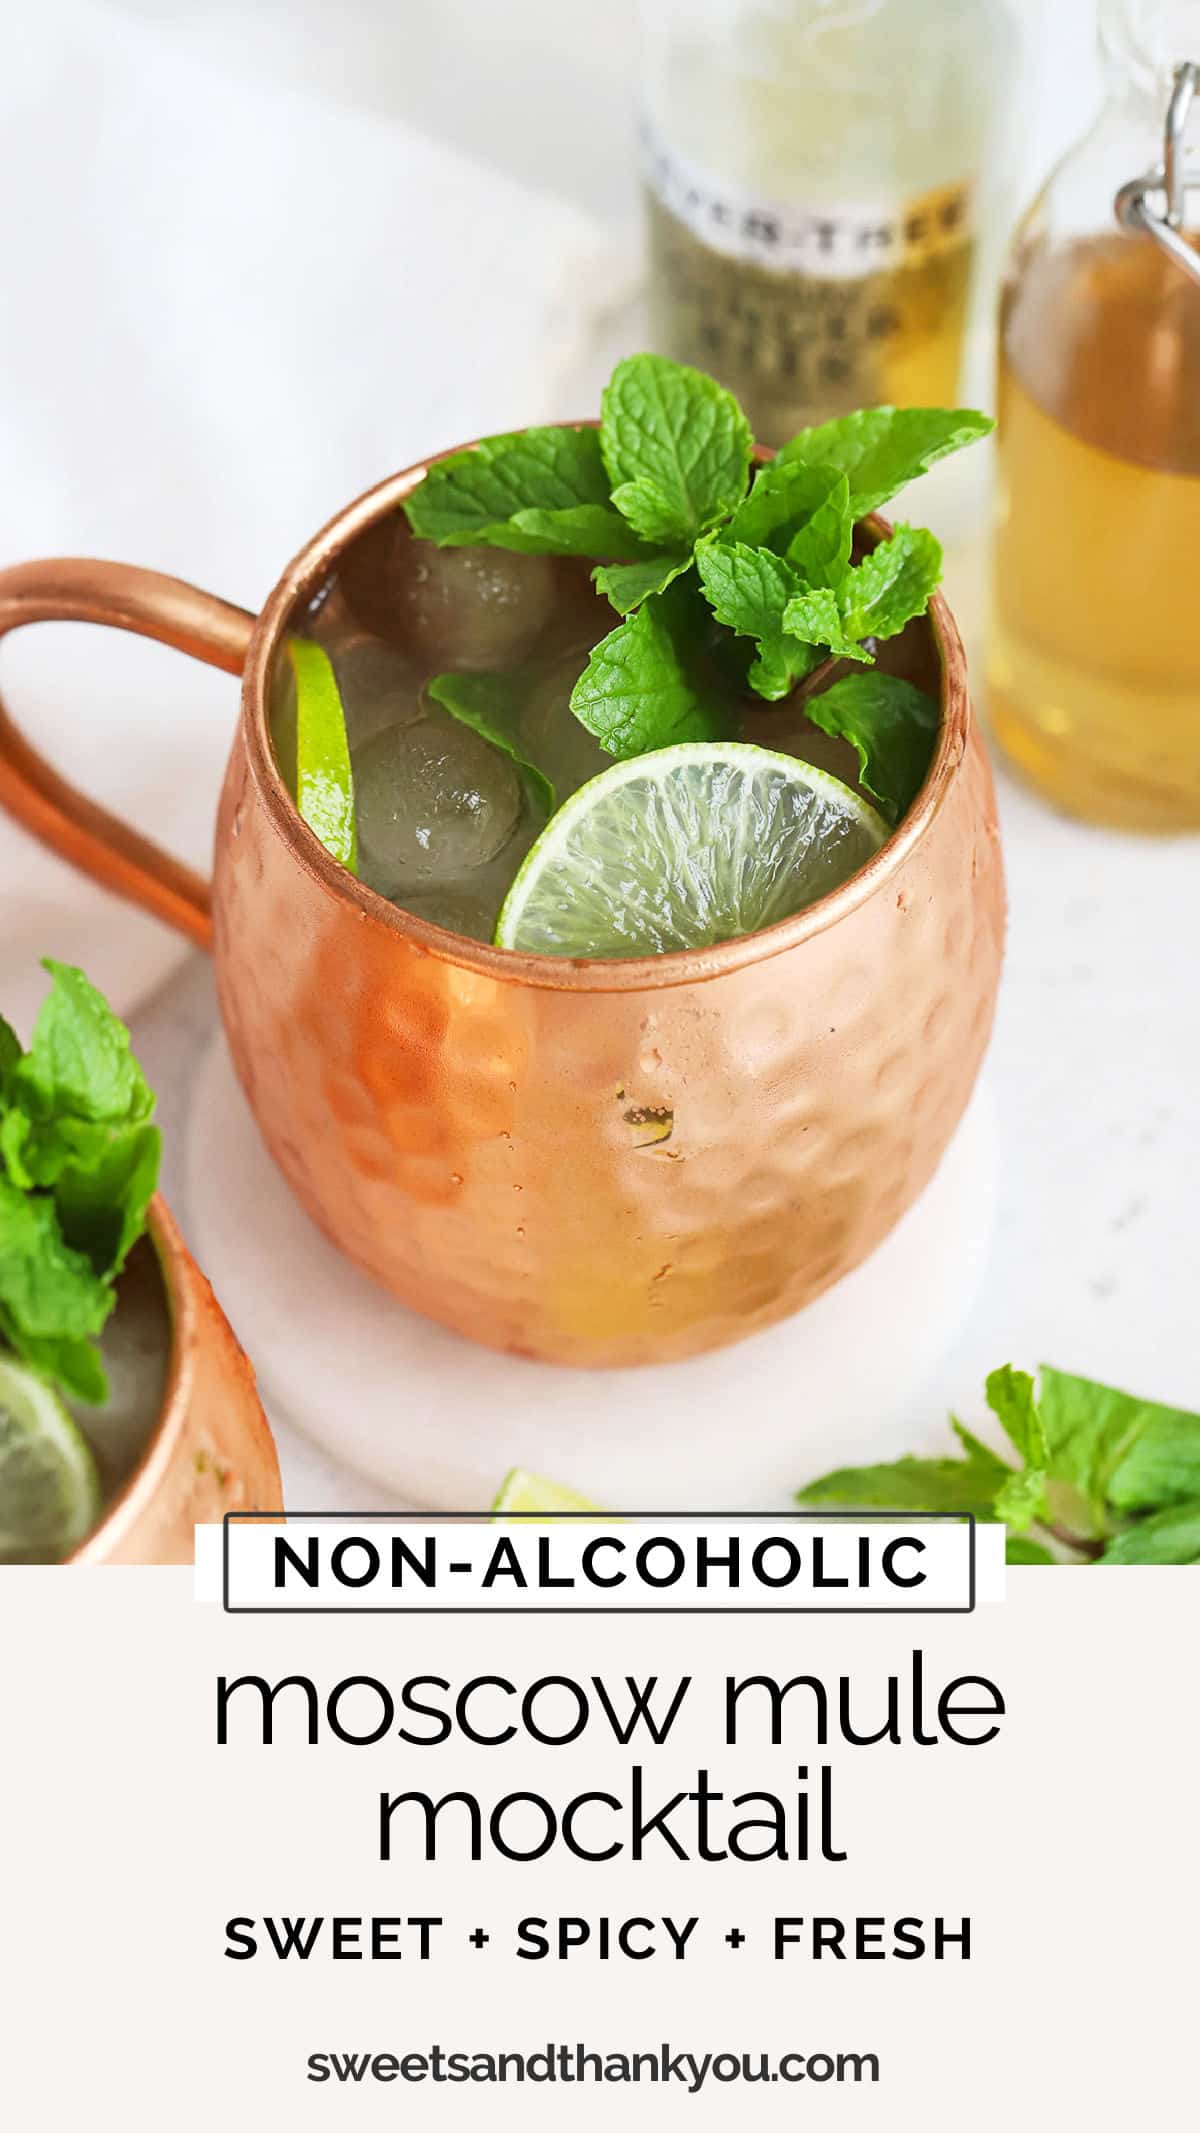 Non-Alcoholic Moscow Mule Mocktail - This virgin moscow mule recipe is sweet, spicy & so refreshing. A perfect party drink! // non-alcoholic moscow mule recipe / moscow mule mocktails / ginger beer mocktail / ginger mocktail / holiday mocktail / how to make a virgin moscow mule / moscow mule mocktail ingredients / virgin party drink / non alcoholic holiday drink / mocktail with ginger beer